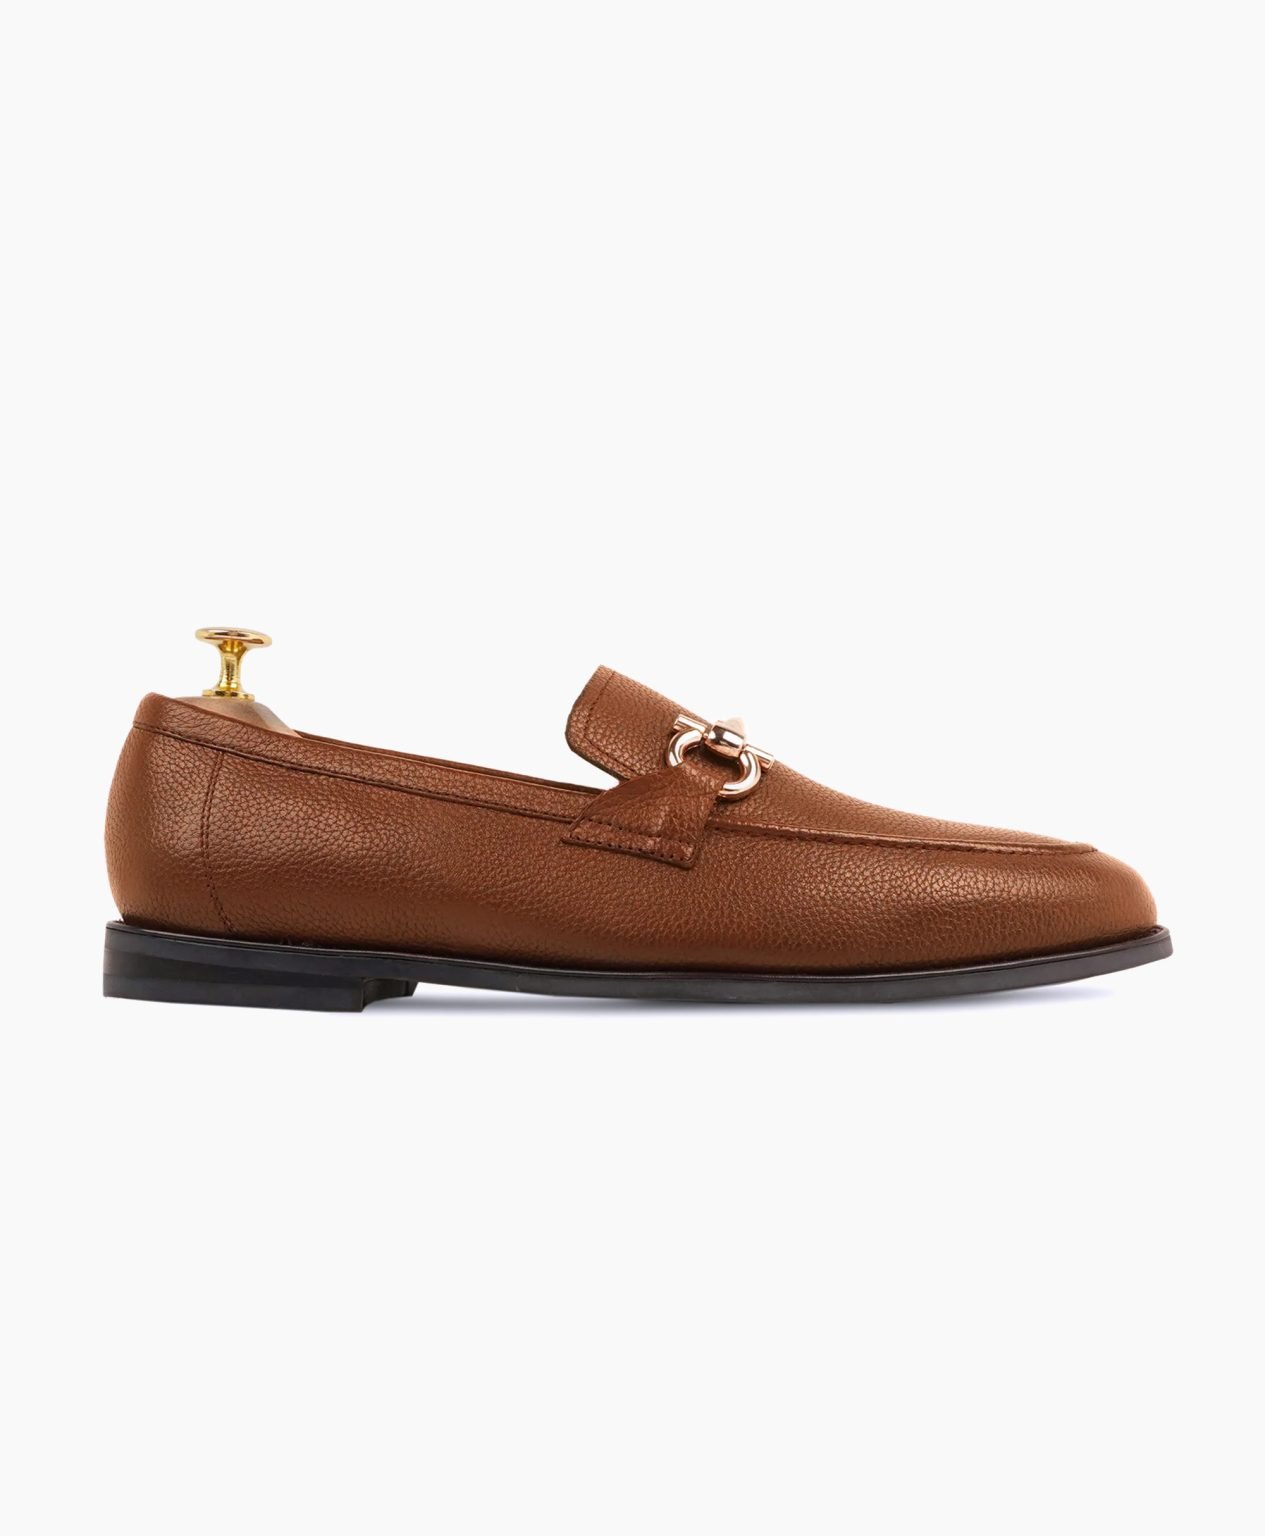 axminster-tan-leather-loafers-image201